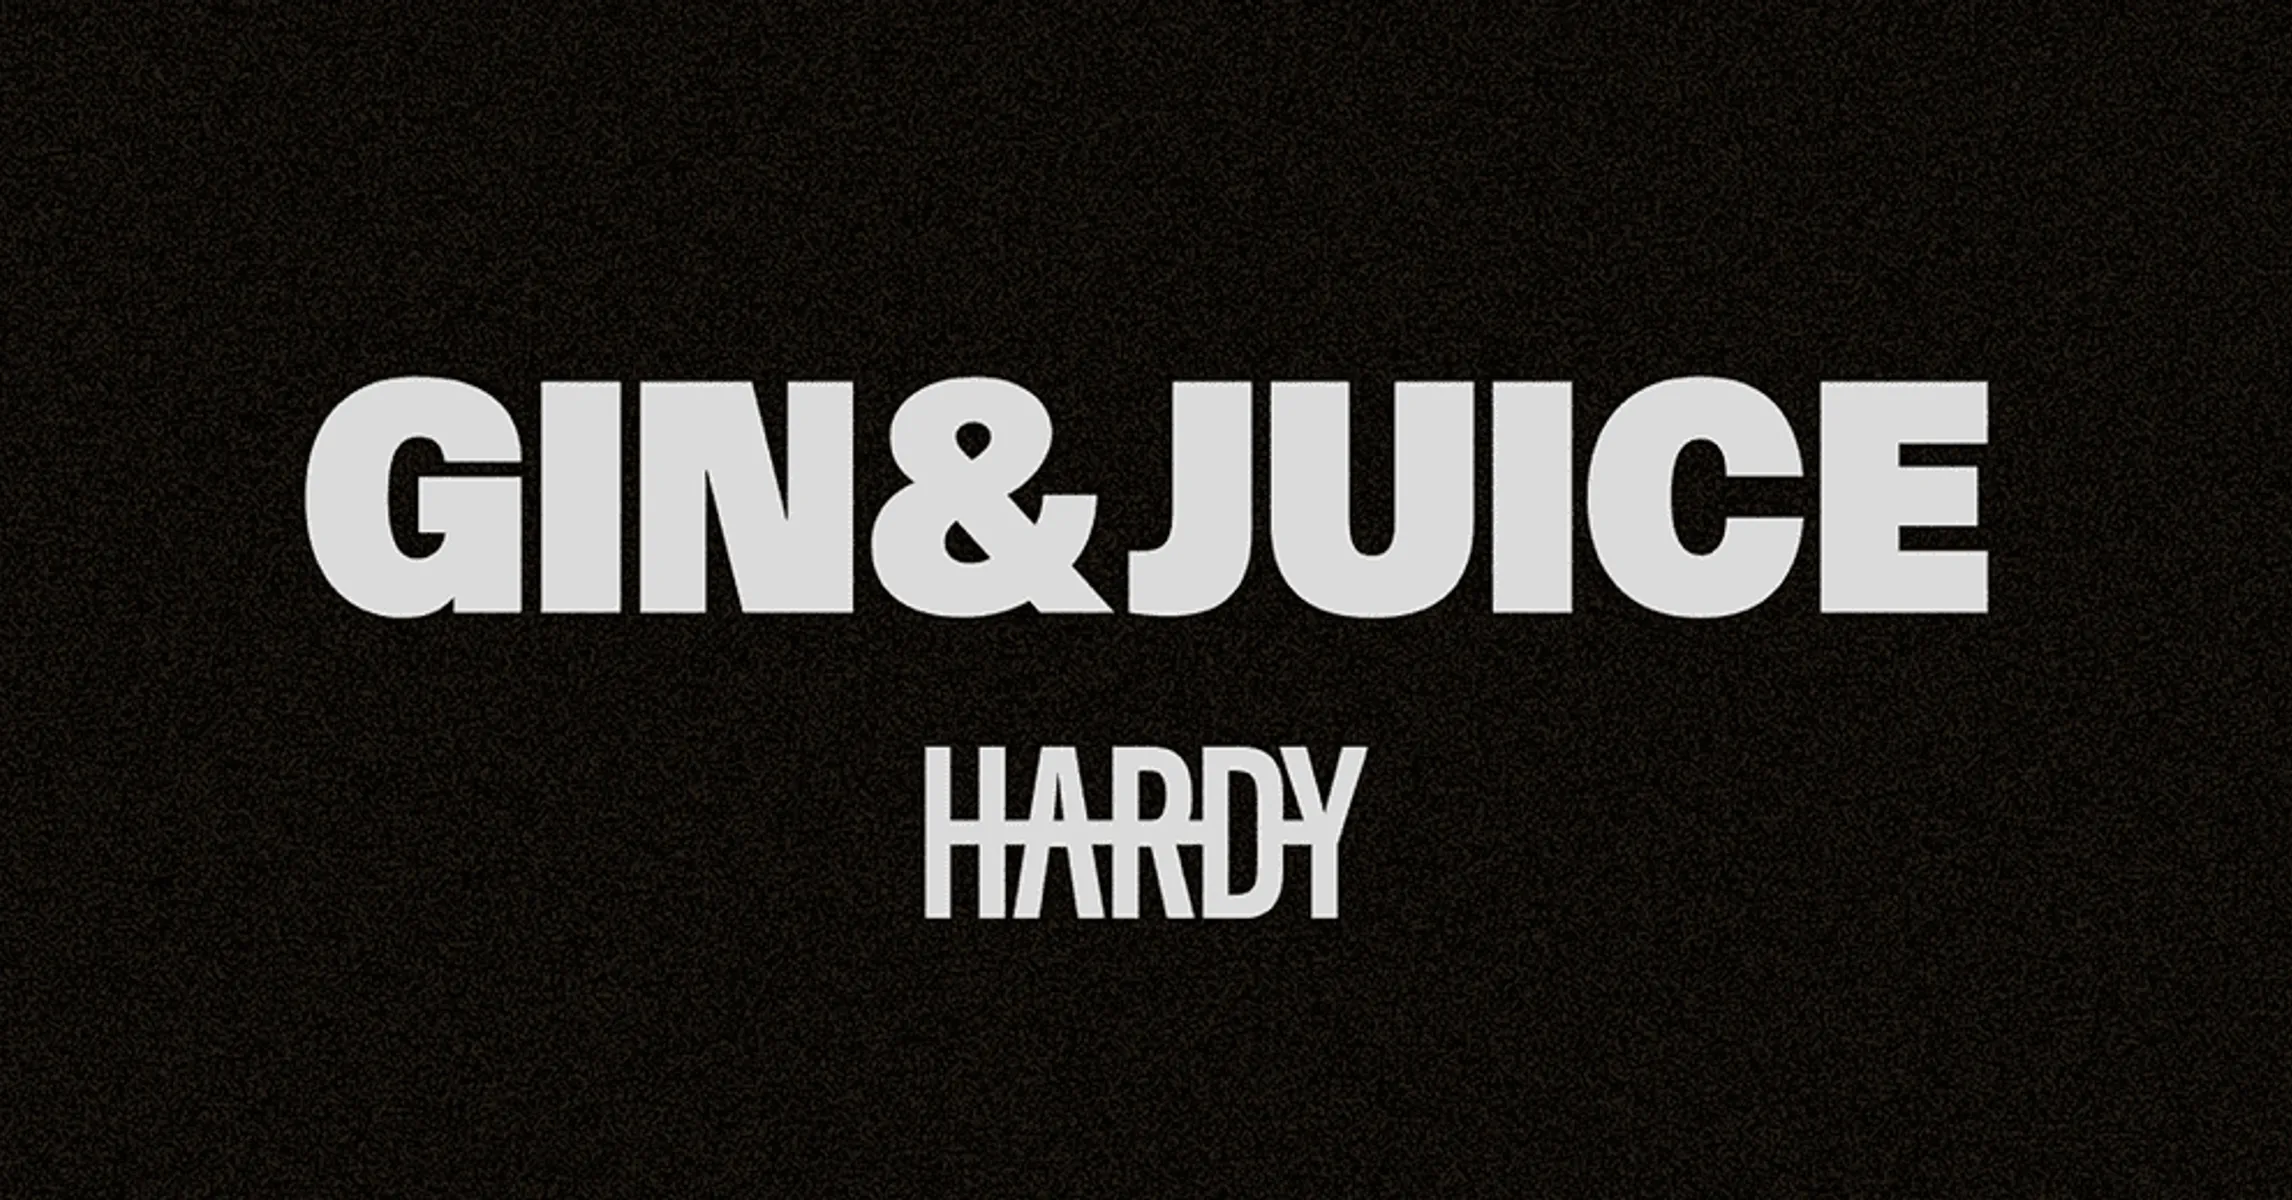 HARDY Puts Country Twang On The Classic Snoop Dogg & Dr. Dre Collab "Gin & Juice"